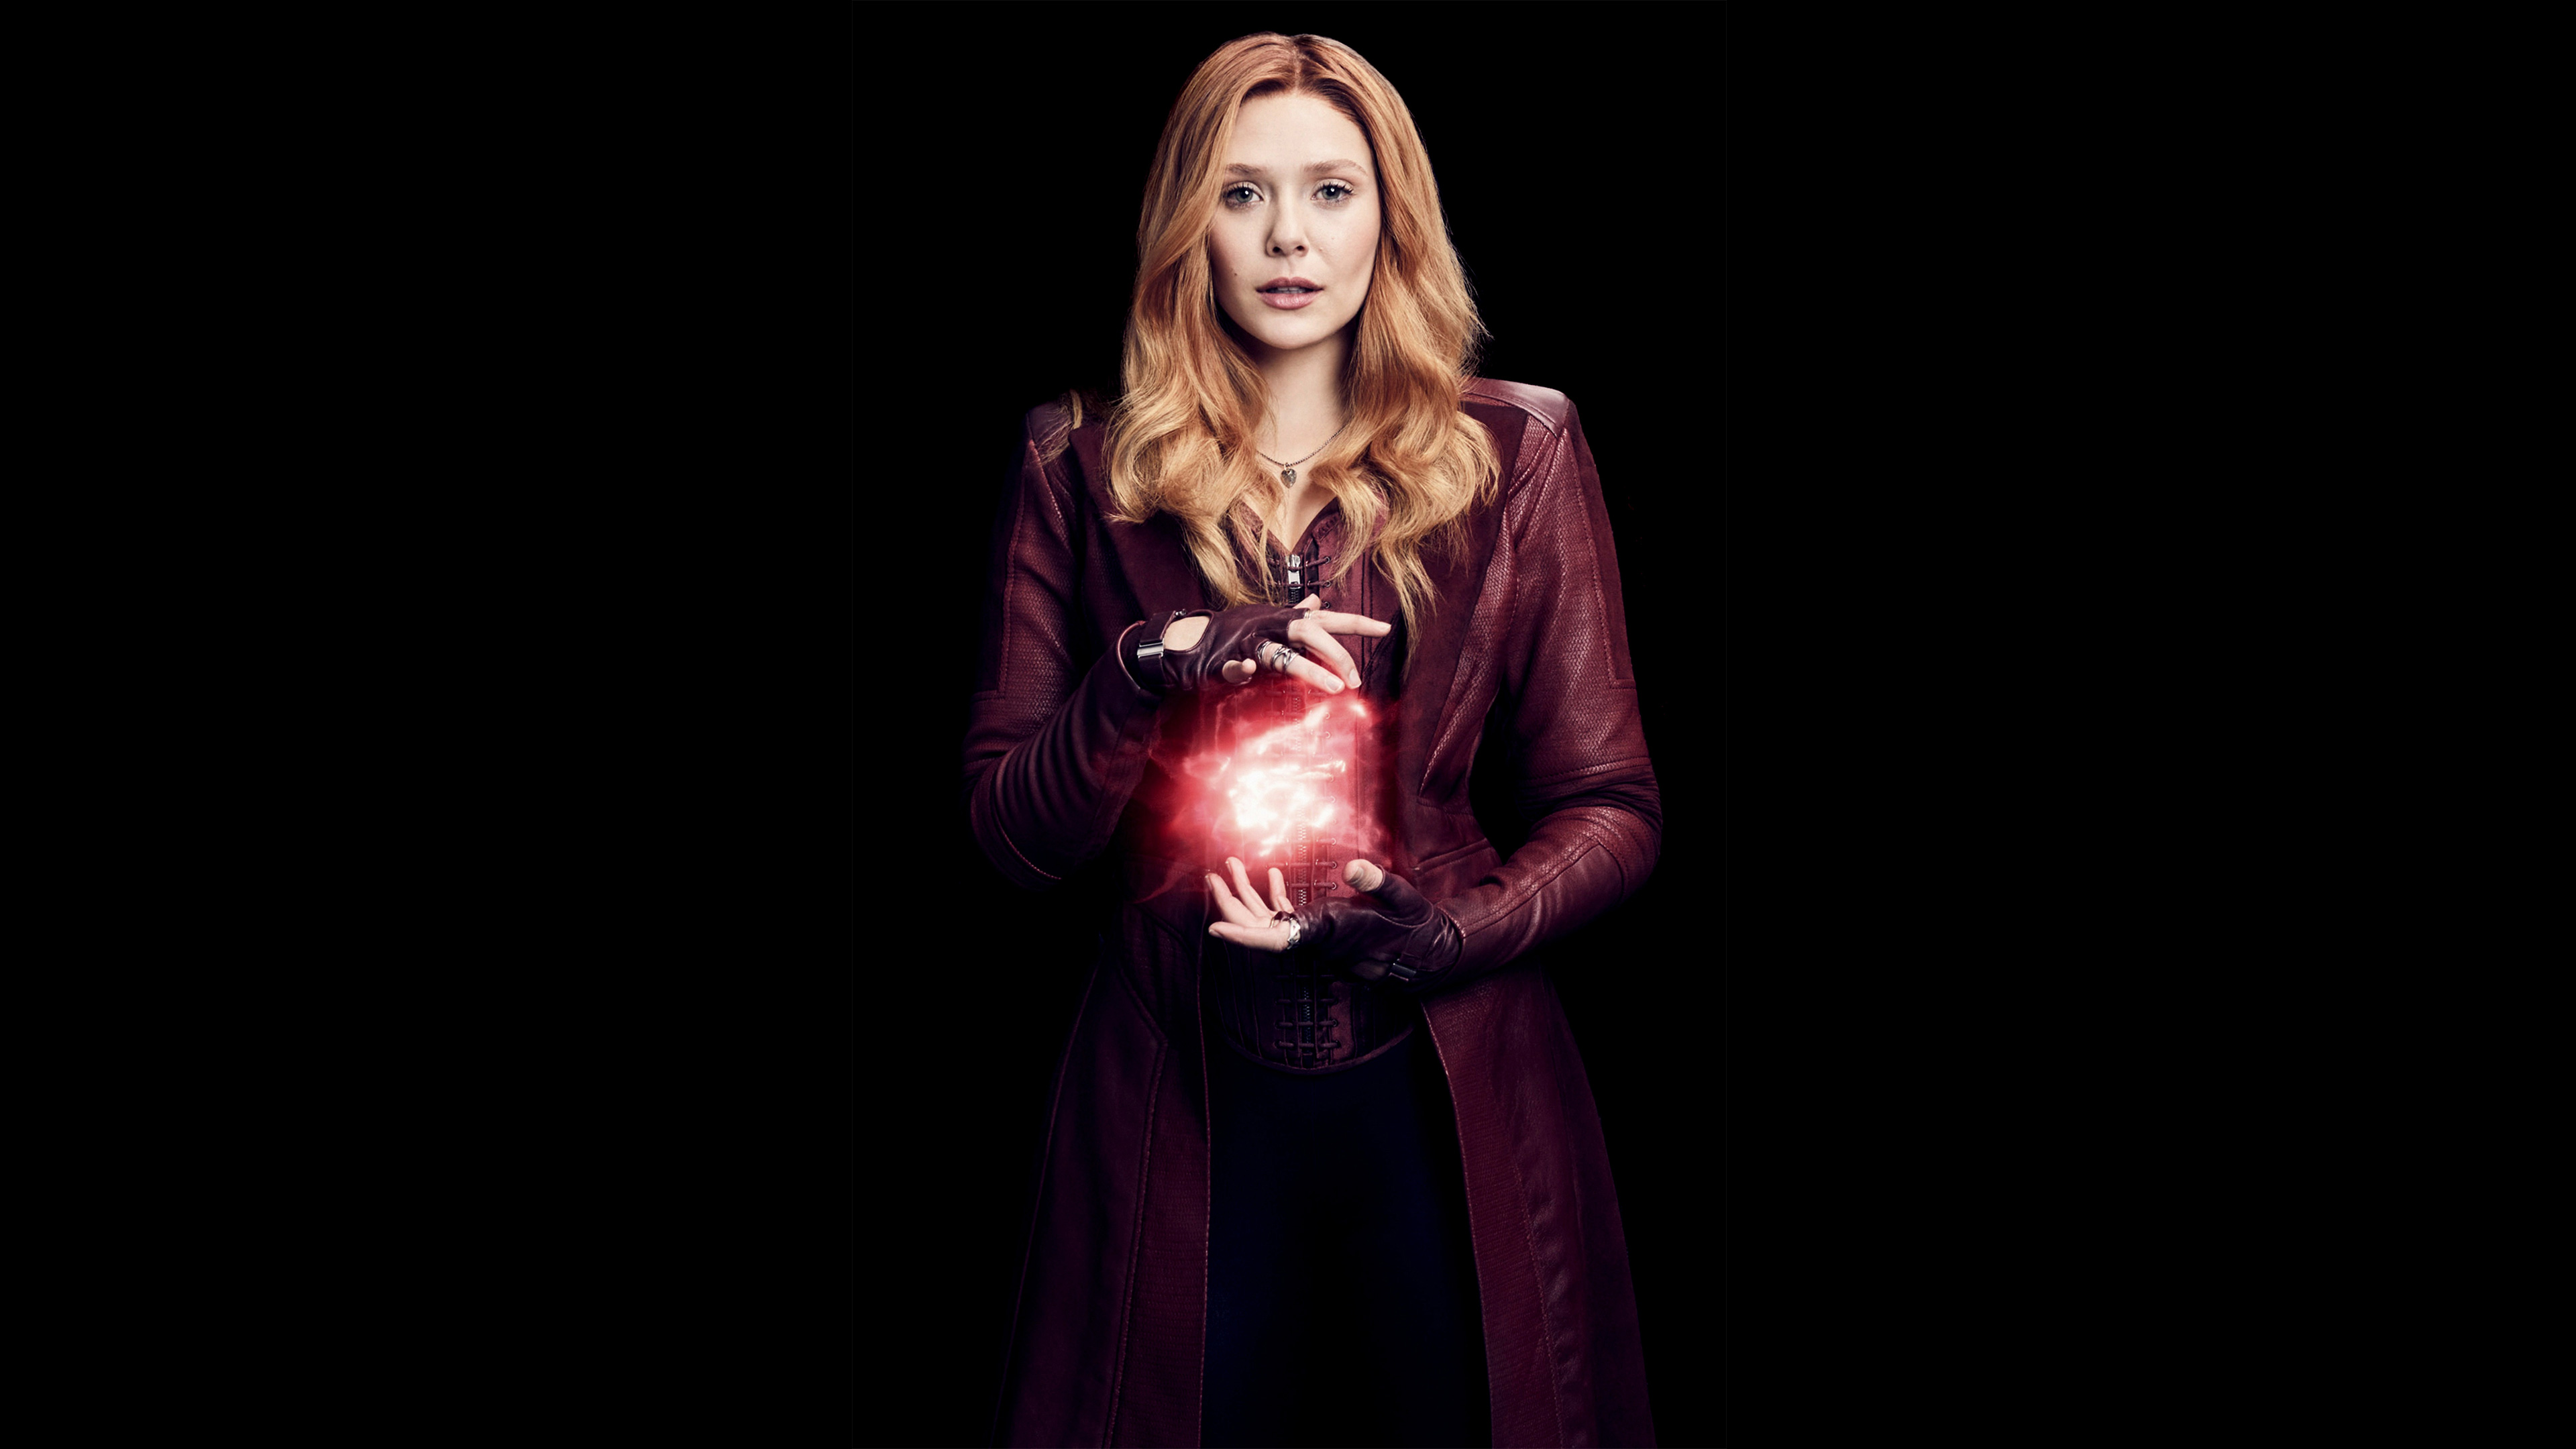 Free photo Wanda Maximoff from Avengers Infinity War with magic red ball in her hands